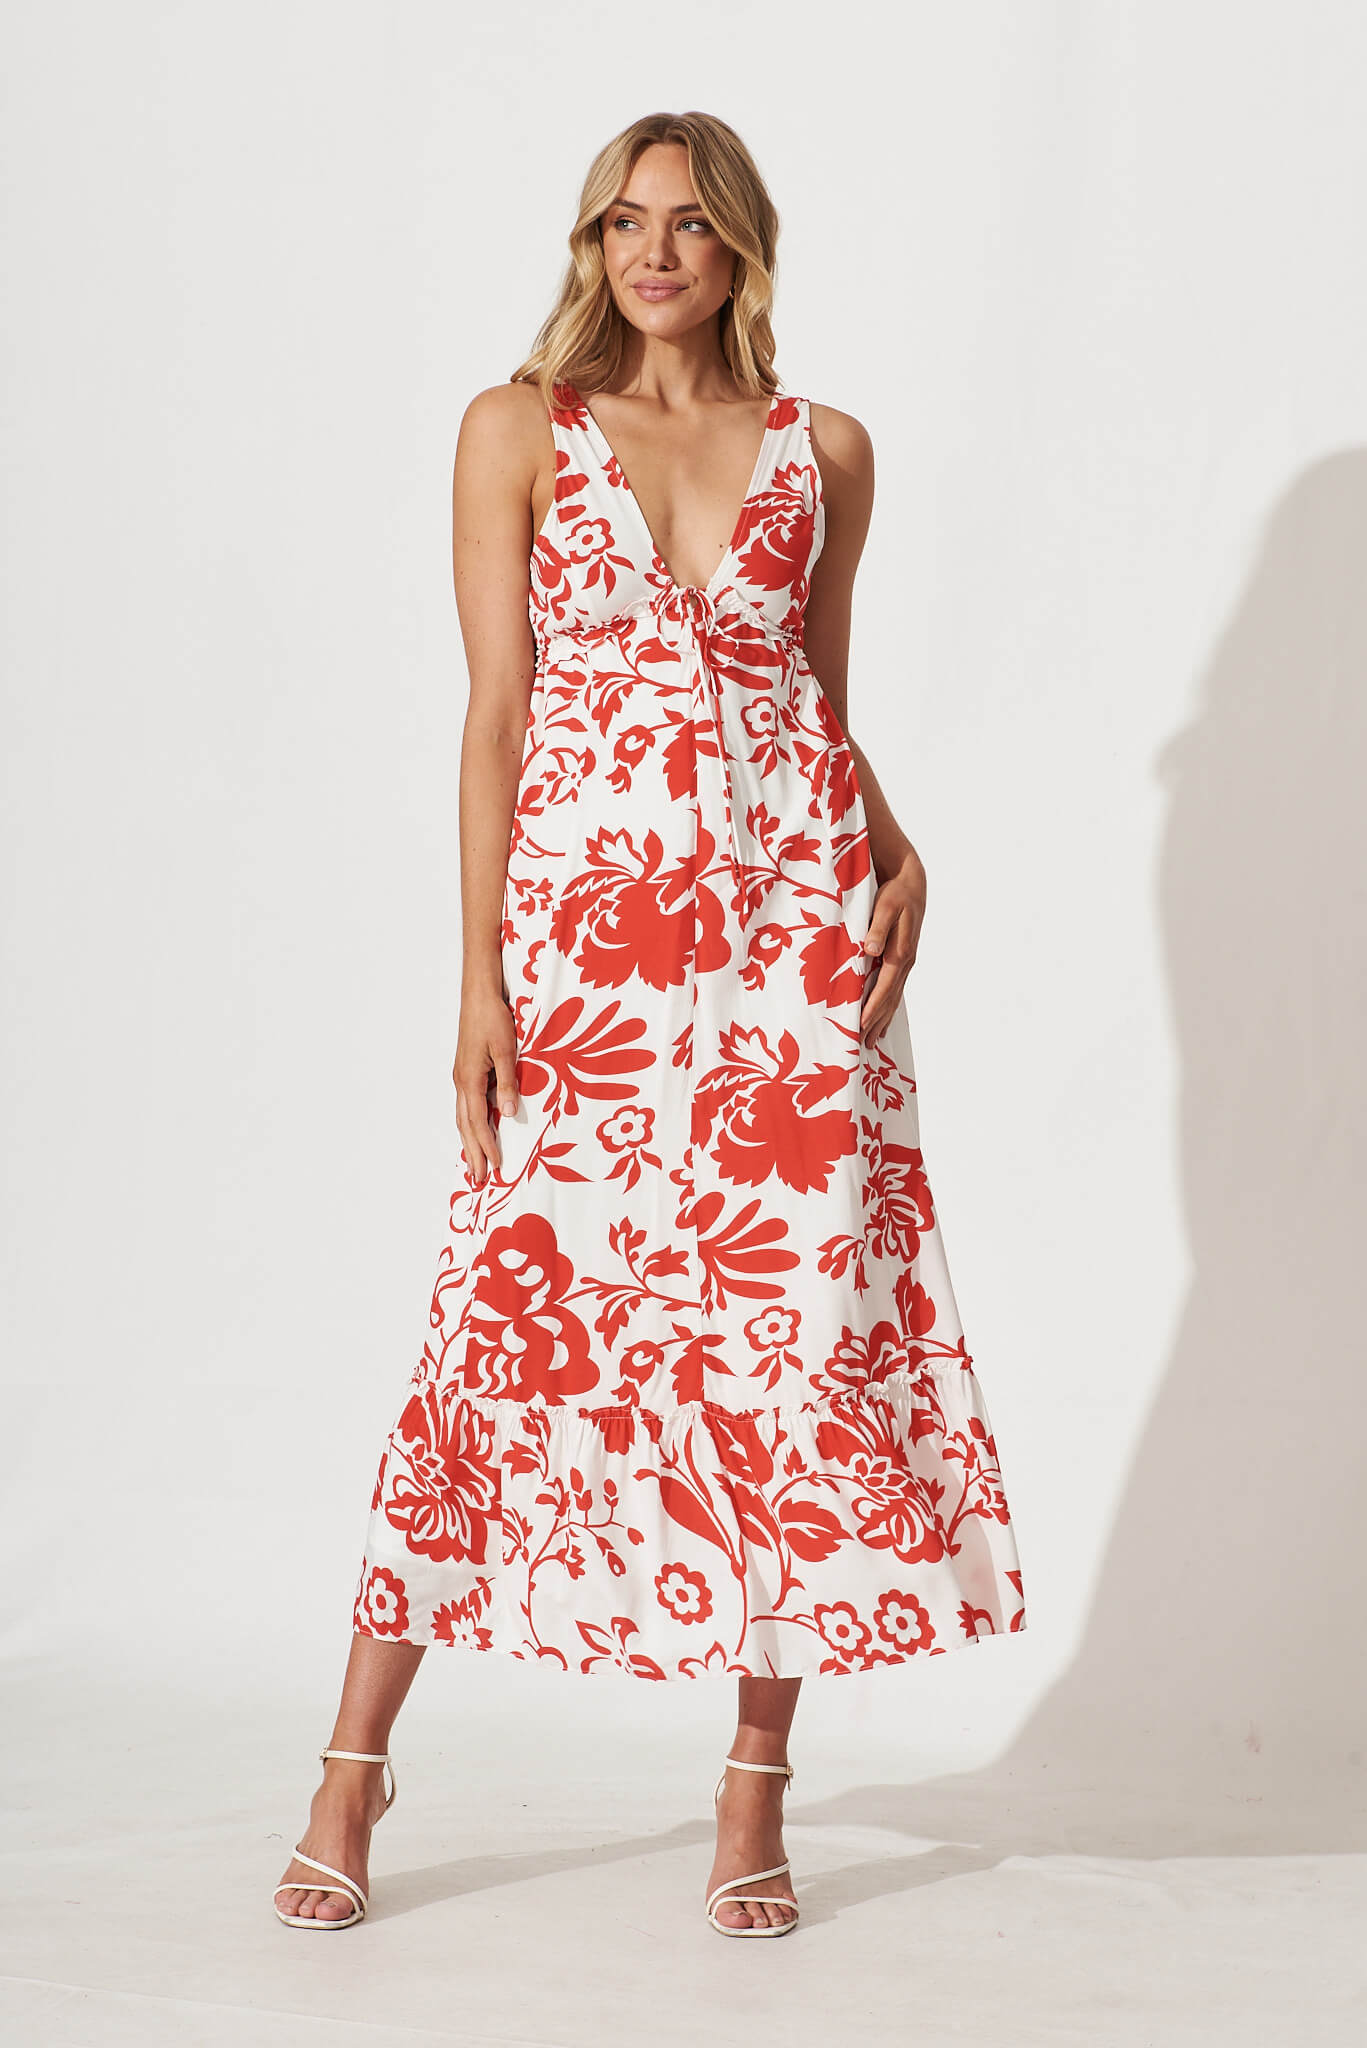 Knowles Maxi Dress In White And Red Print - full length